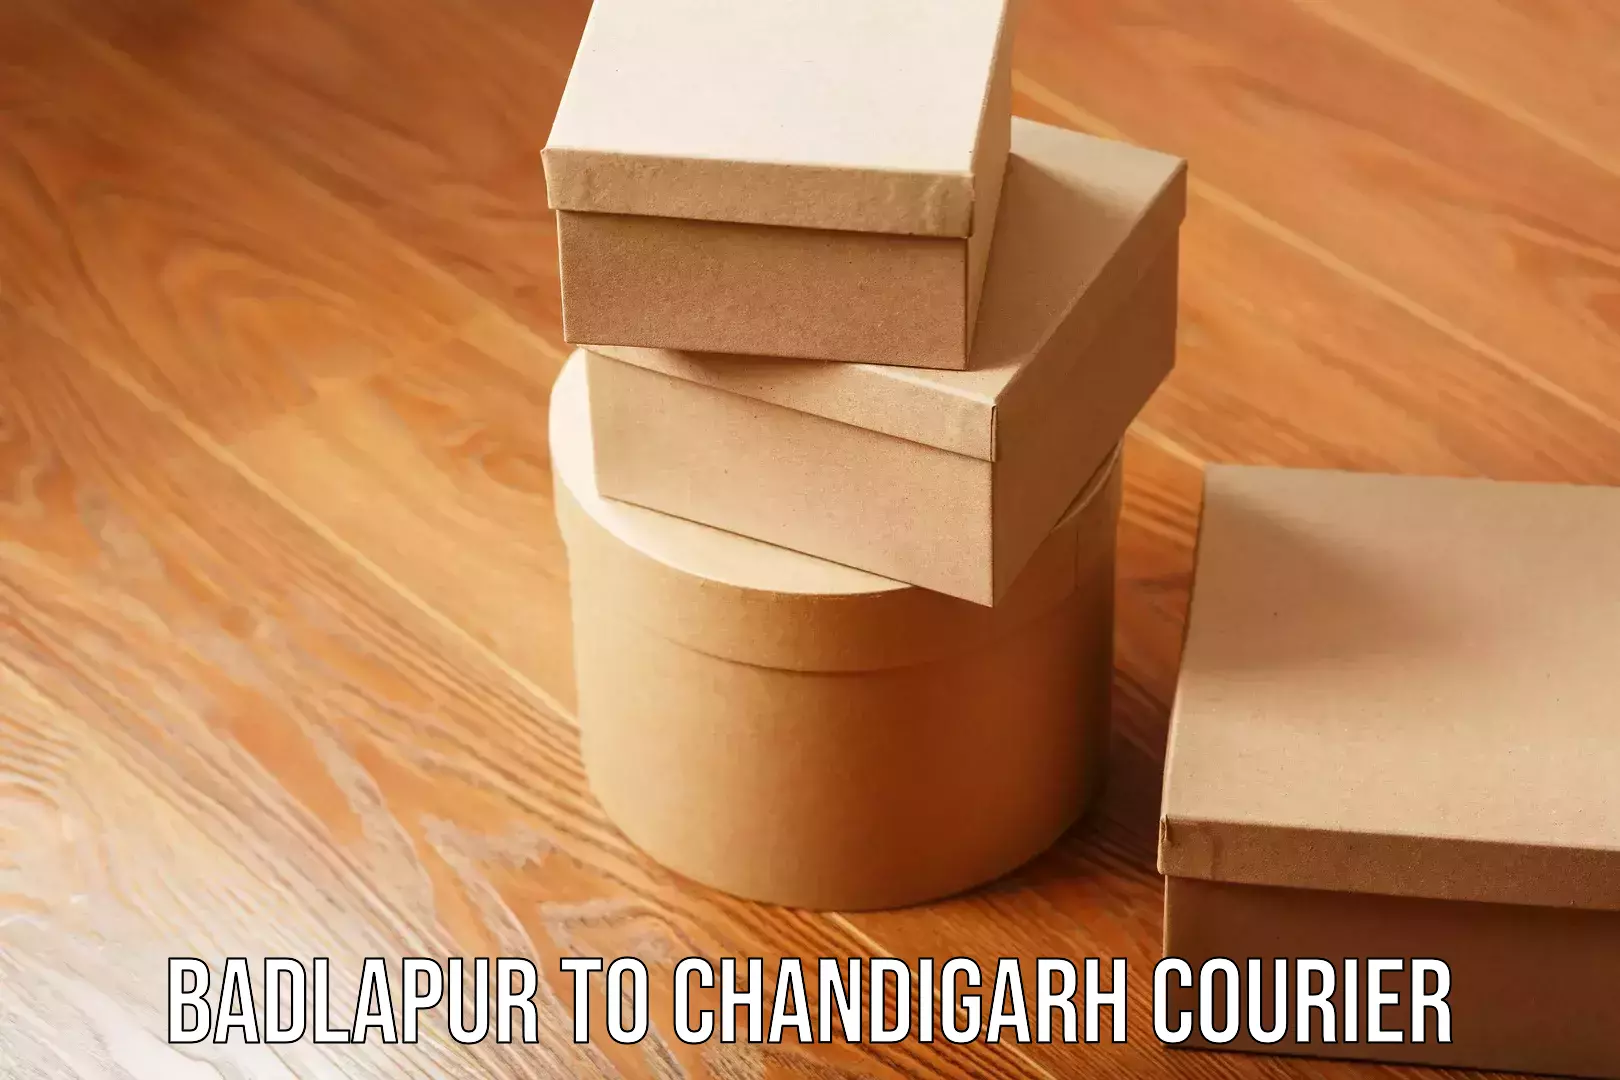 On-call courier service Badlapur to Chandigarh